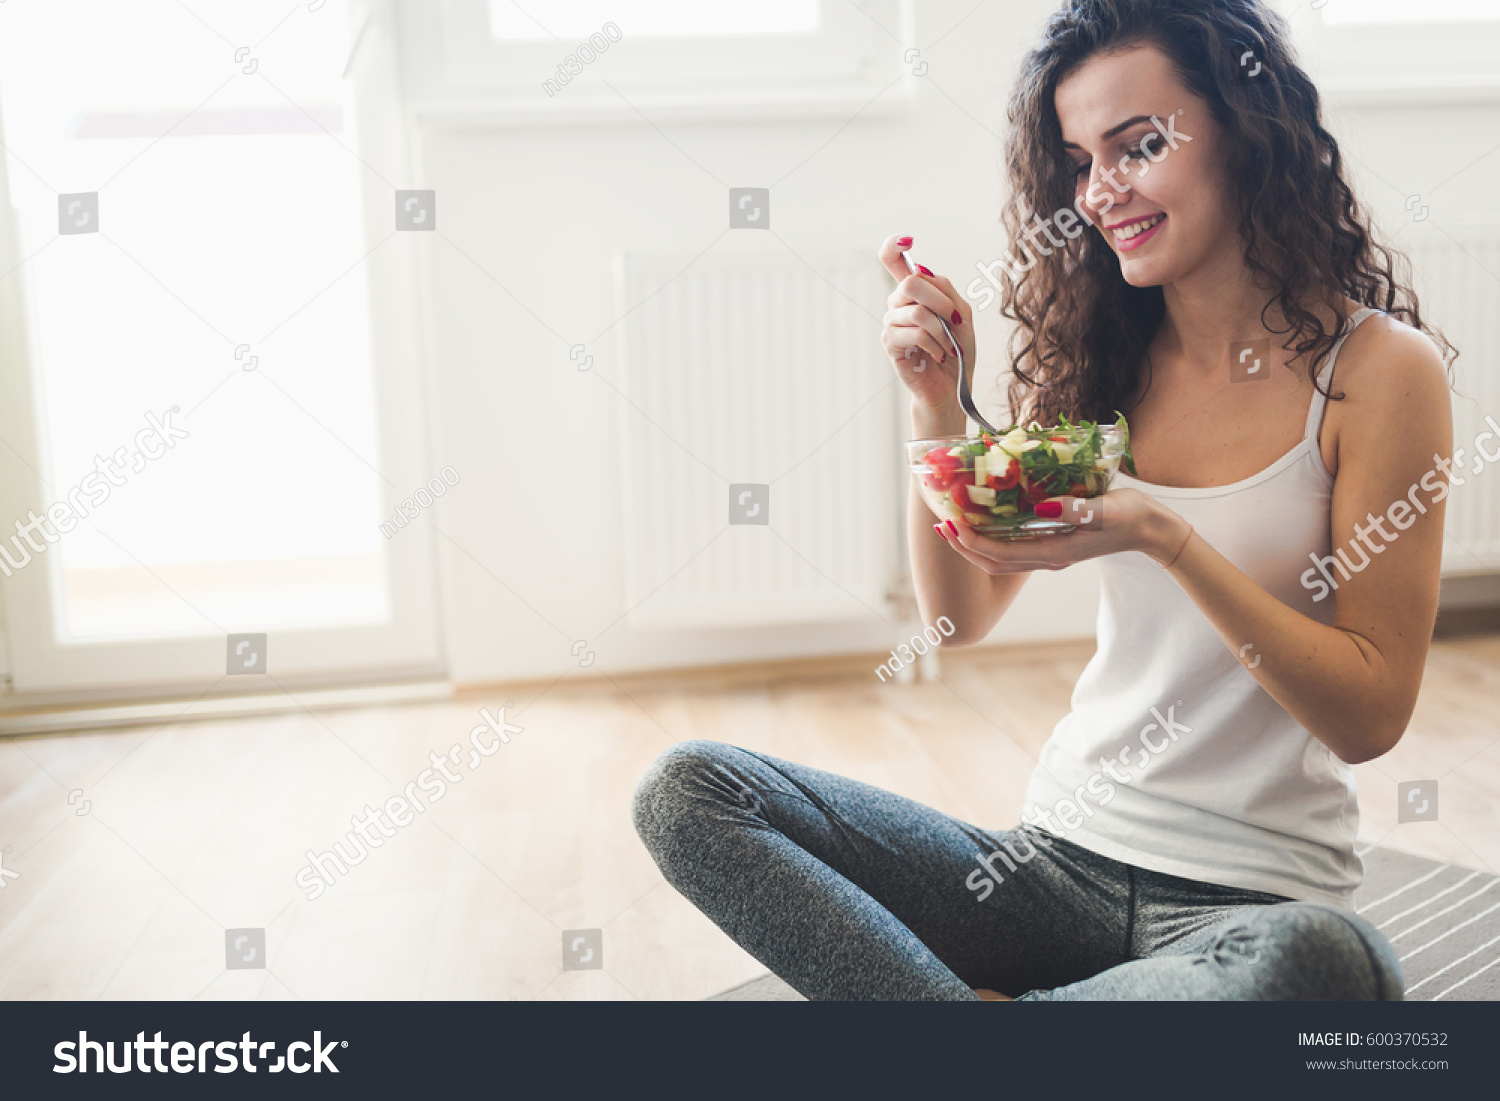 Beautiful fit woman eating healthy salad after fitness workout #600370532